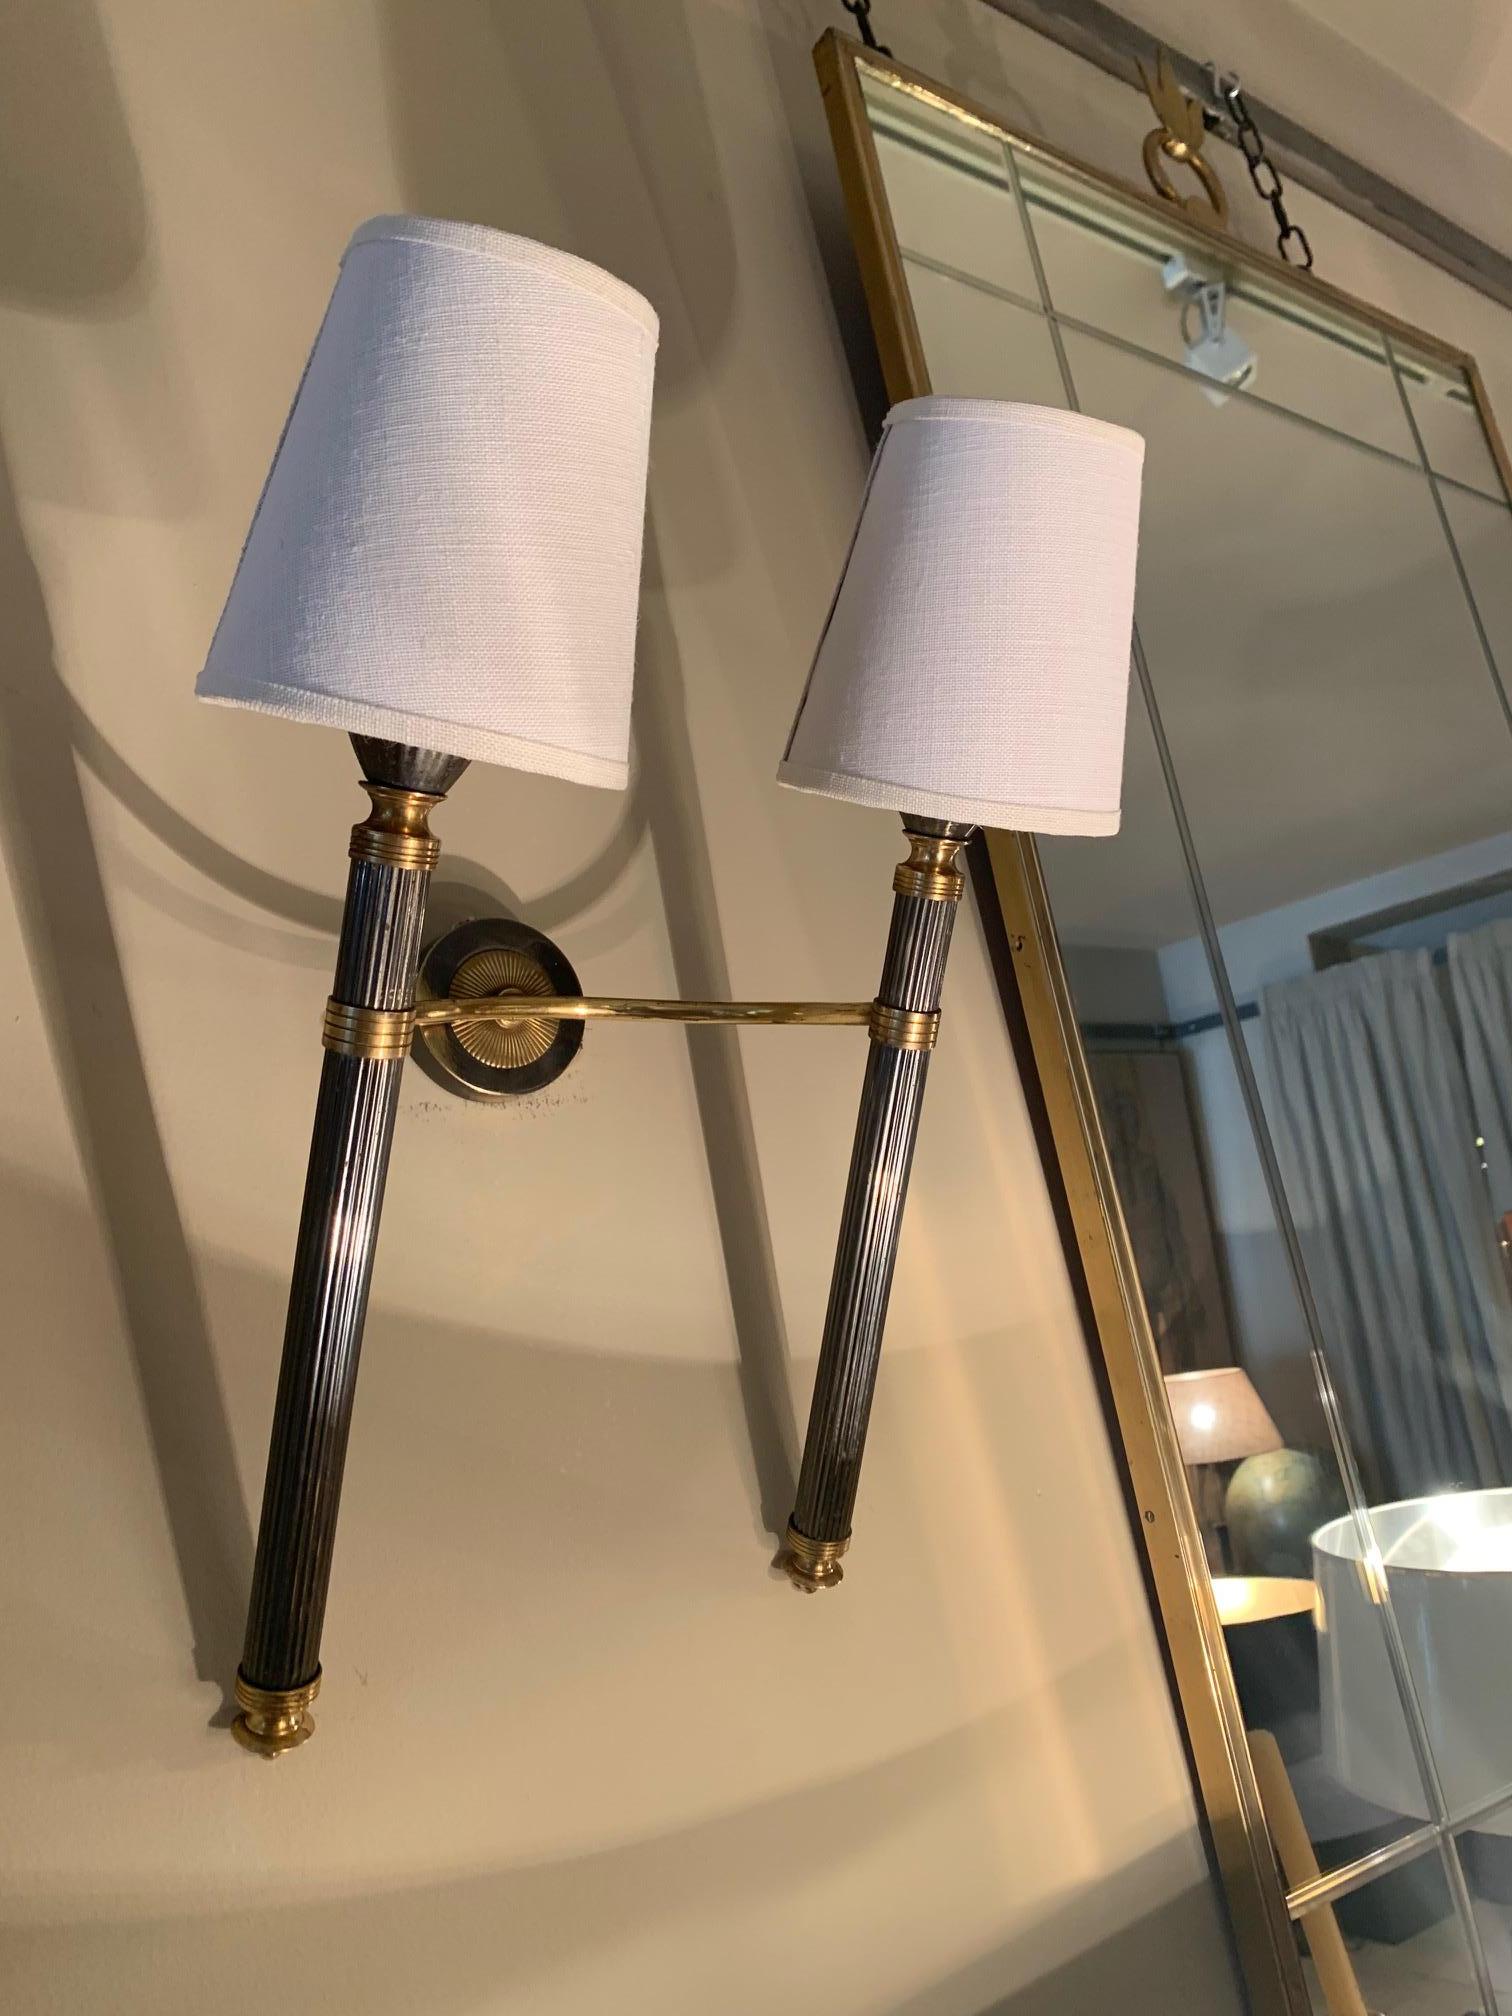 Pair of elegant double wall sconces by Maison Lunel in gilded metal, lacquered and brass, broken white lamp pantalls with gilded interior, 40 wat max, newly wired.